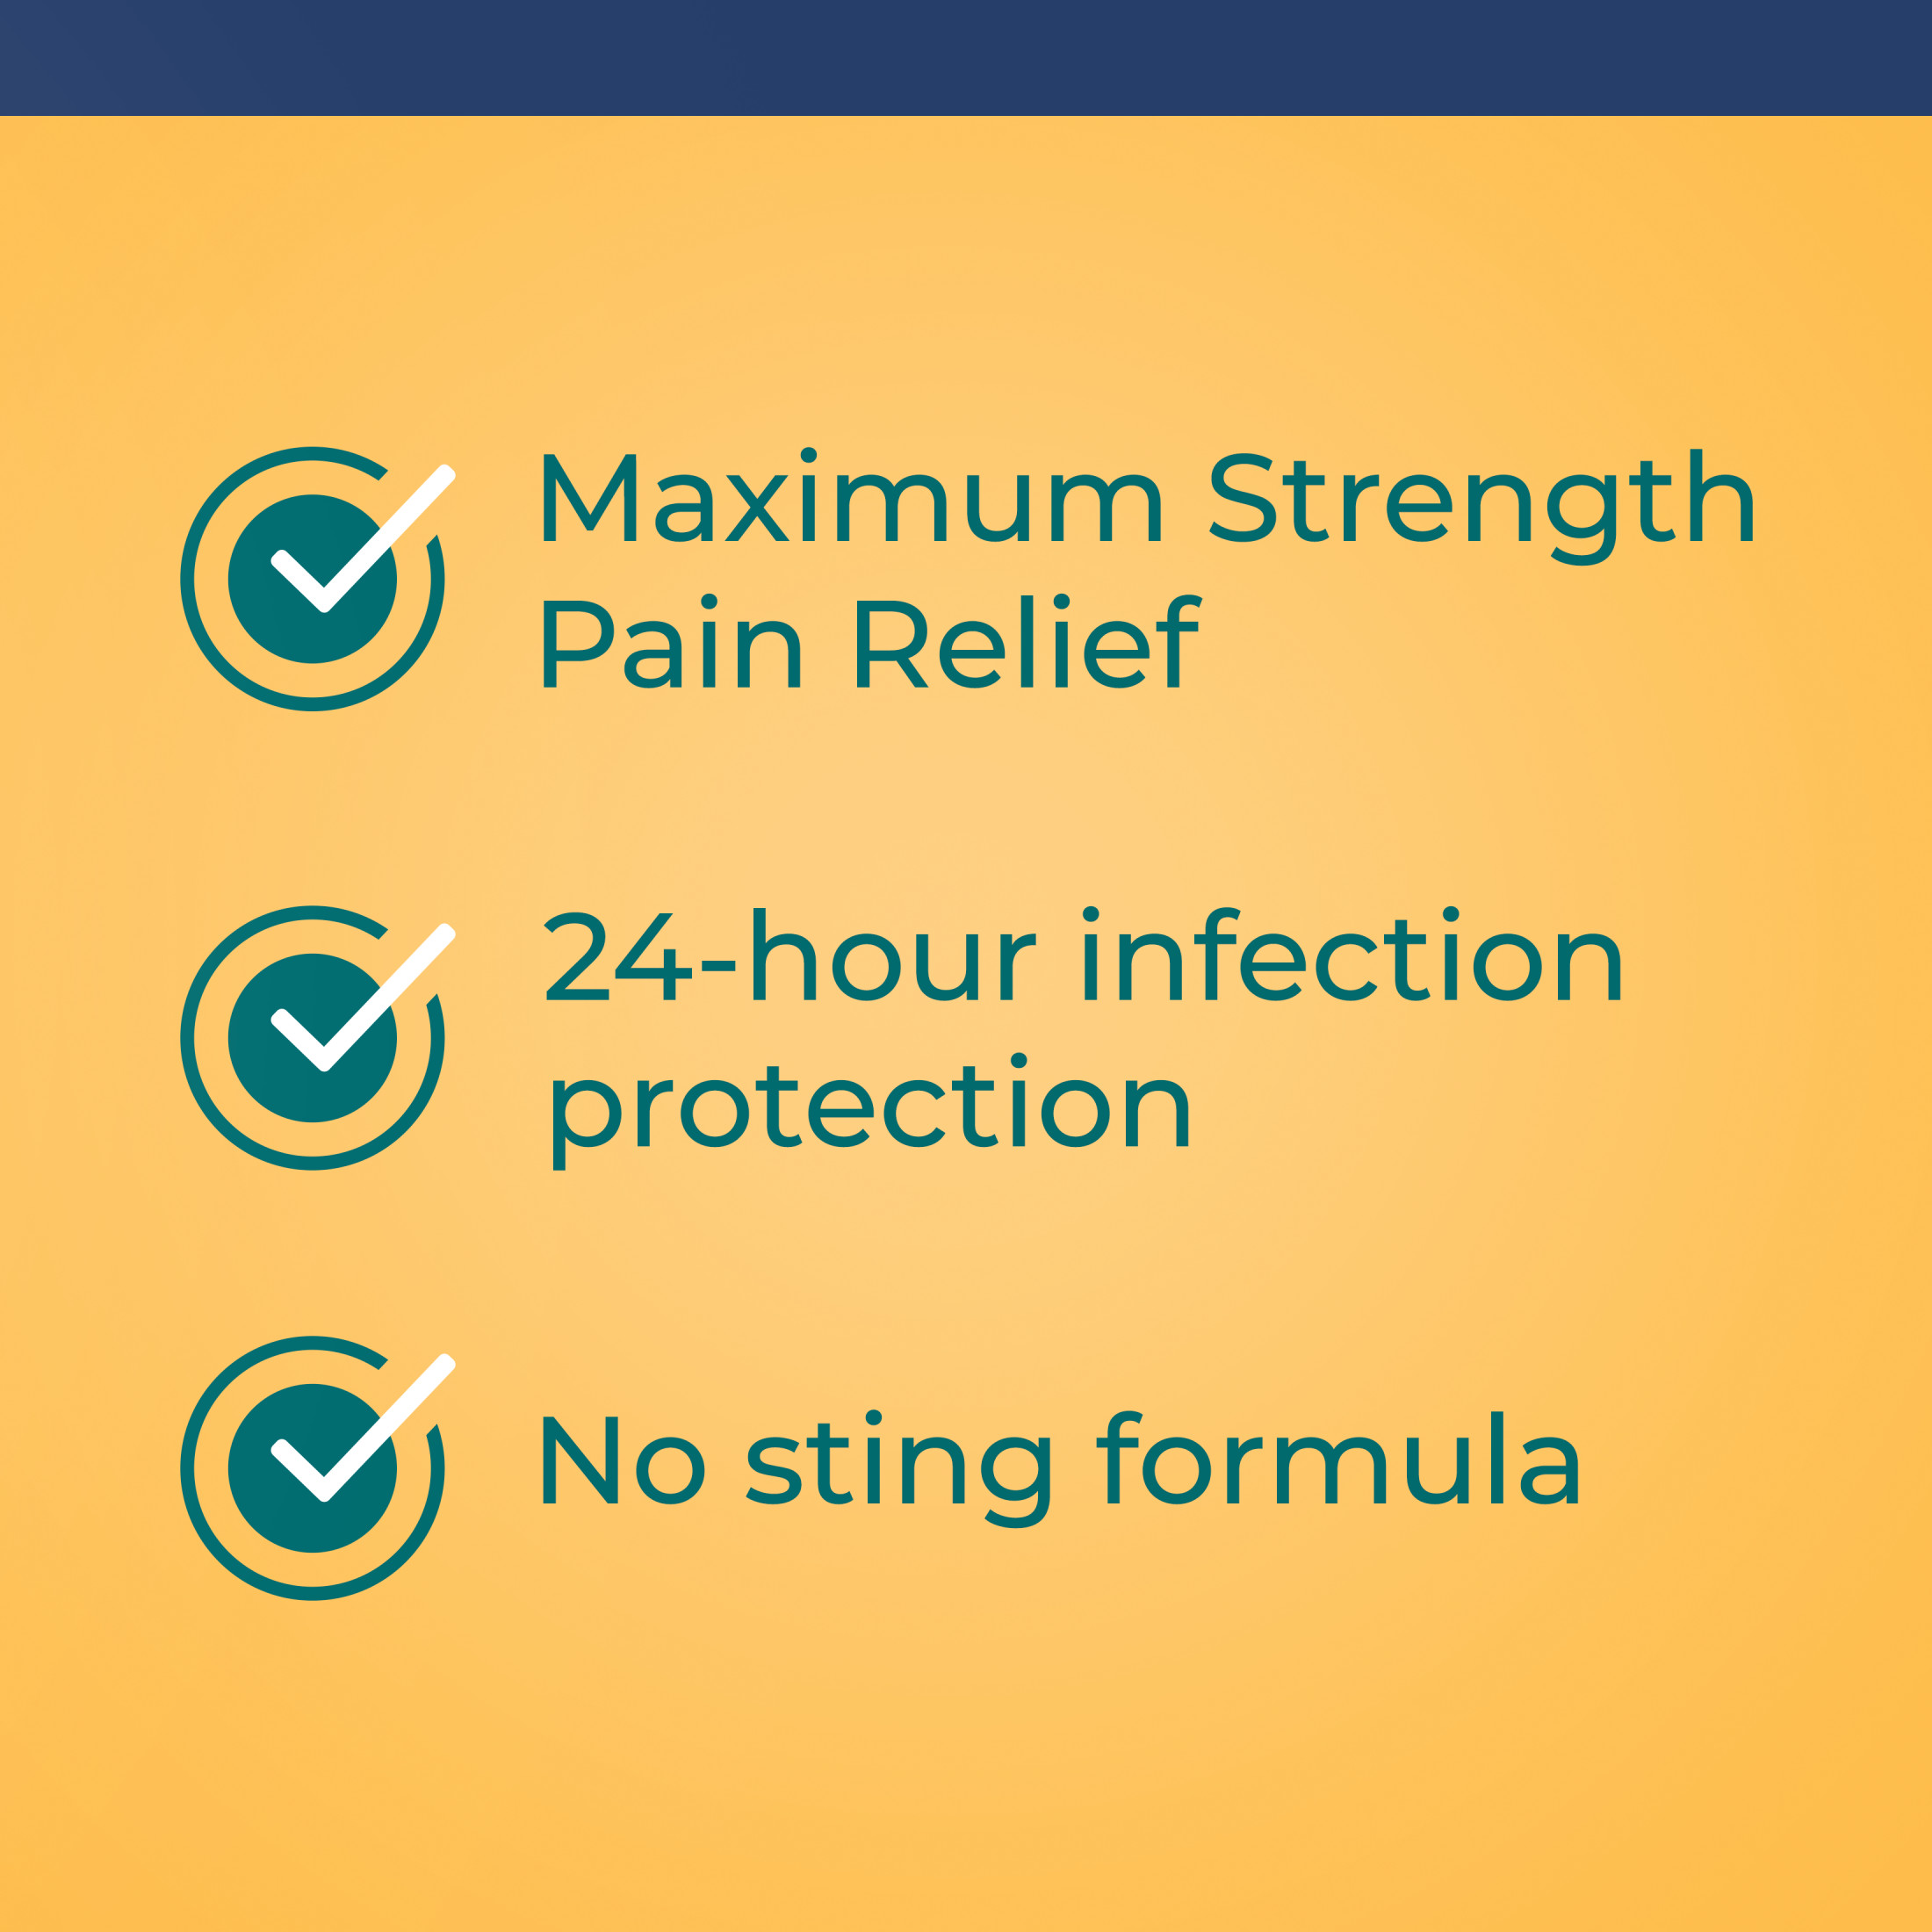 Neosporin + Pain Relief Dual Action Topical Antibiotic Ointment,.5 oz - image 4 of 11